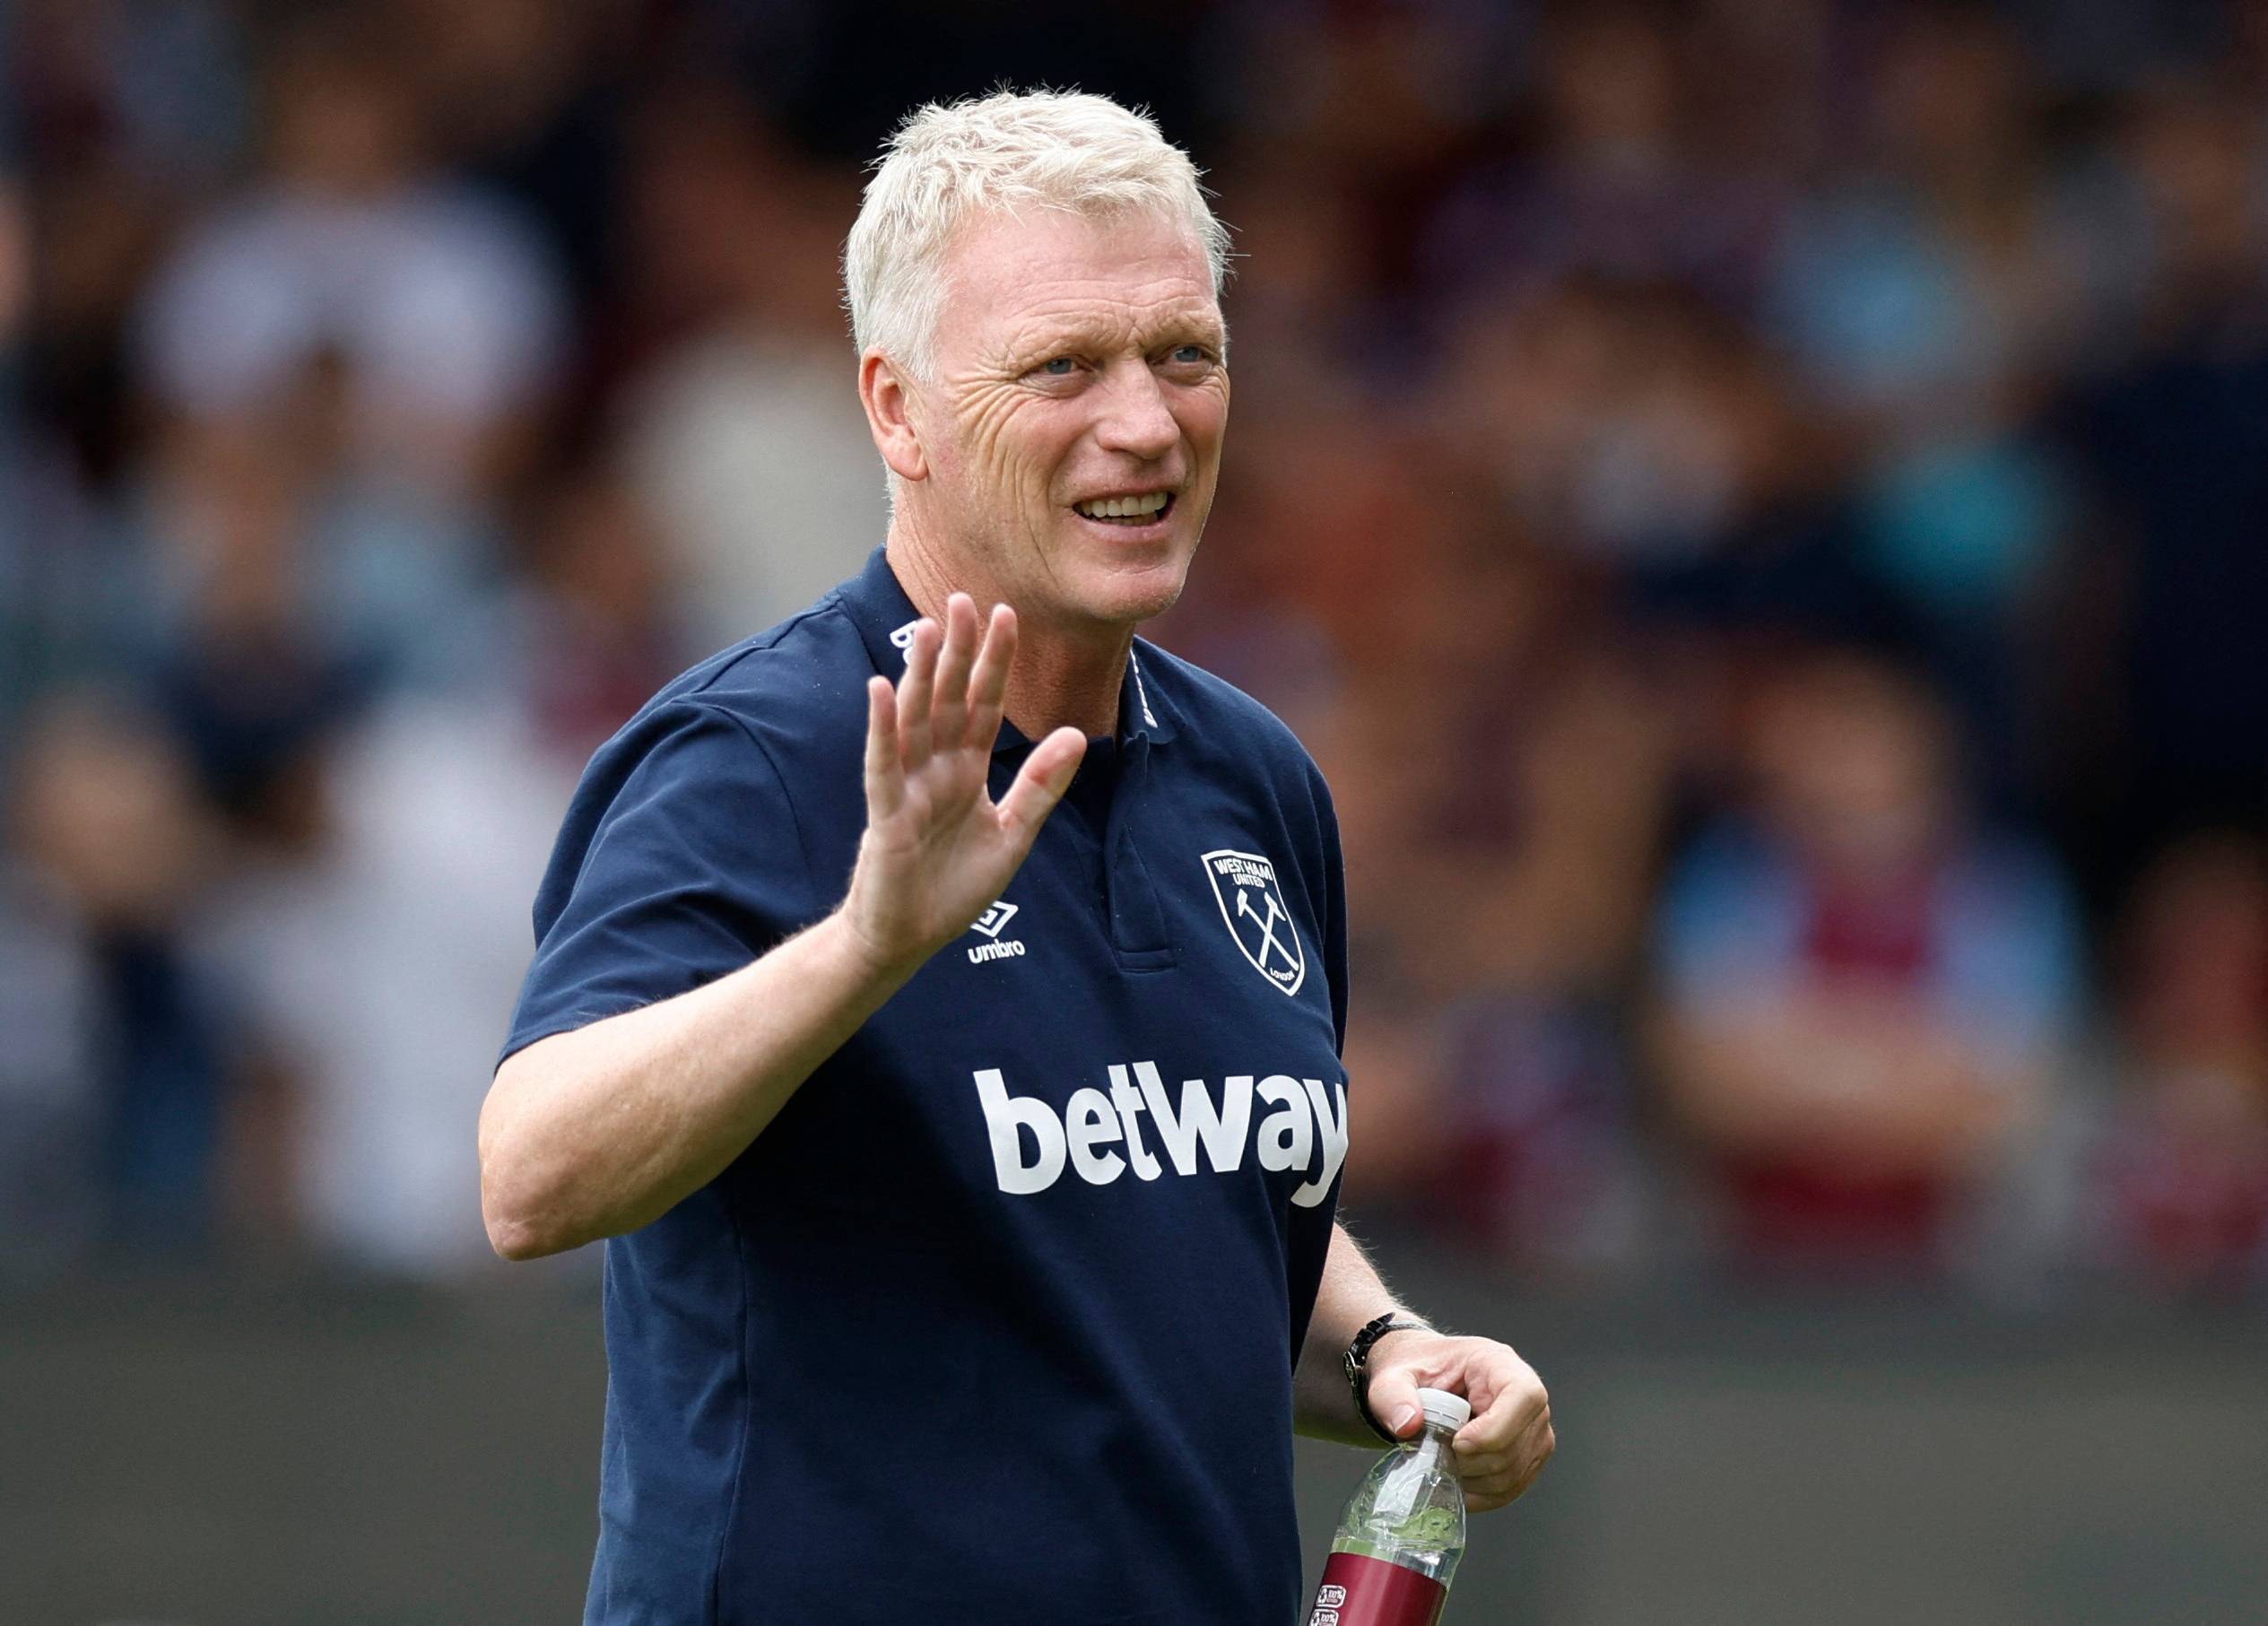 West Ham United boss David Moyes acknowledges the supporters